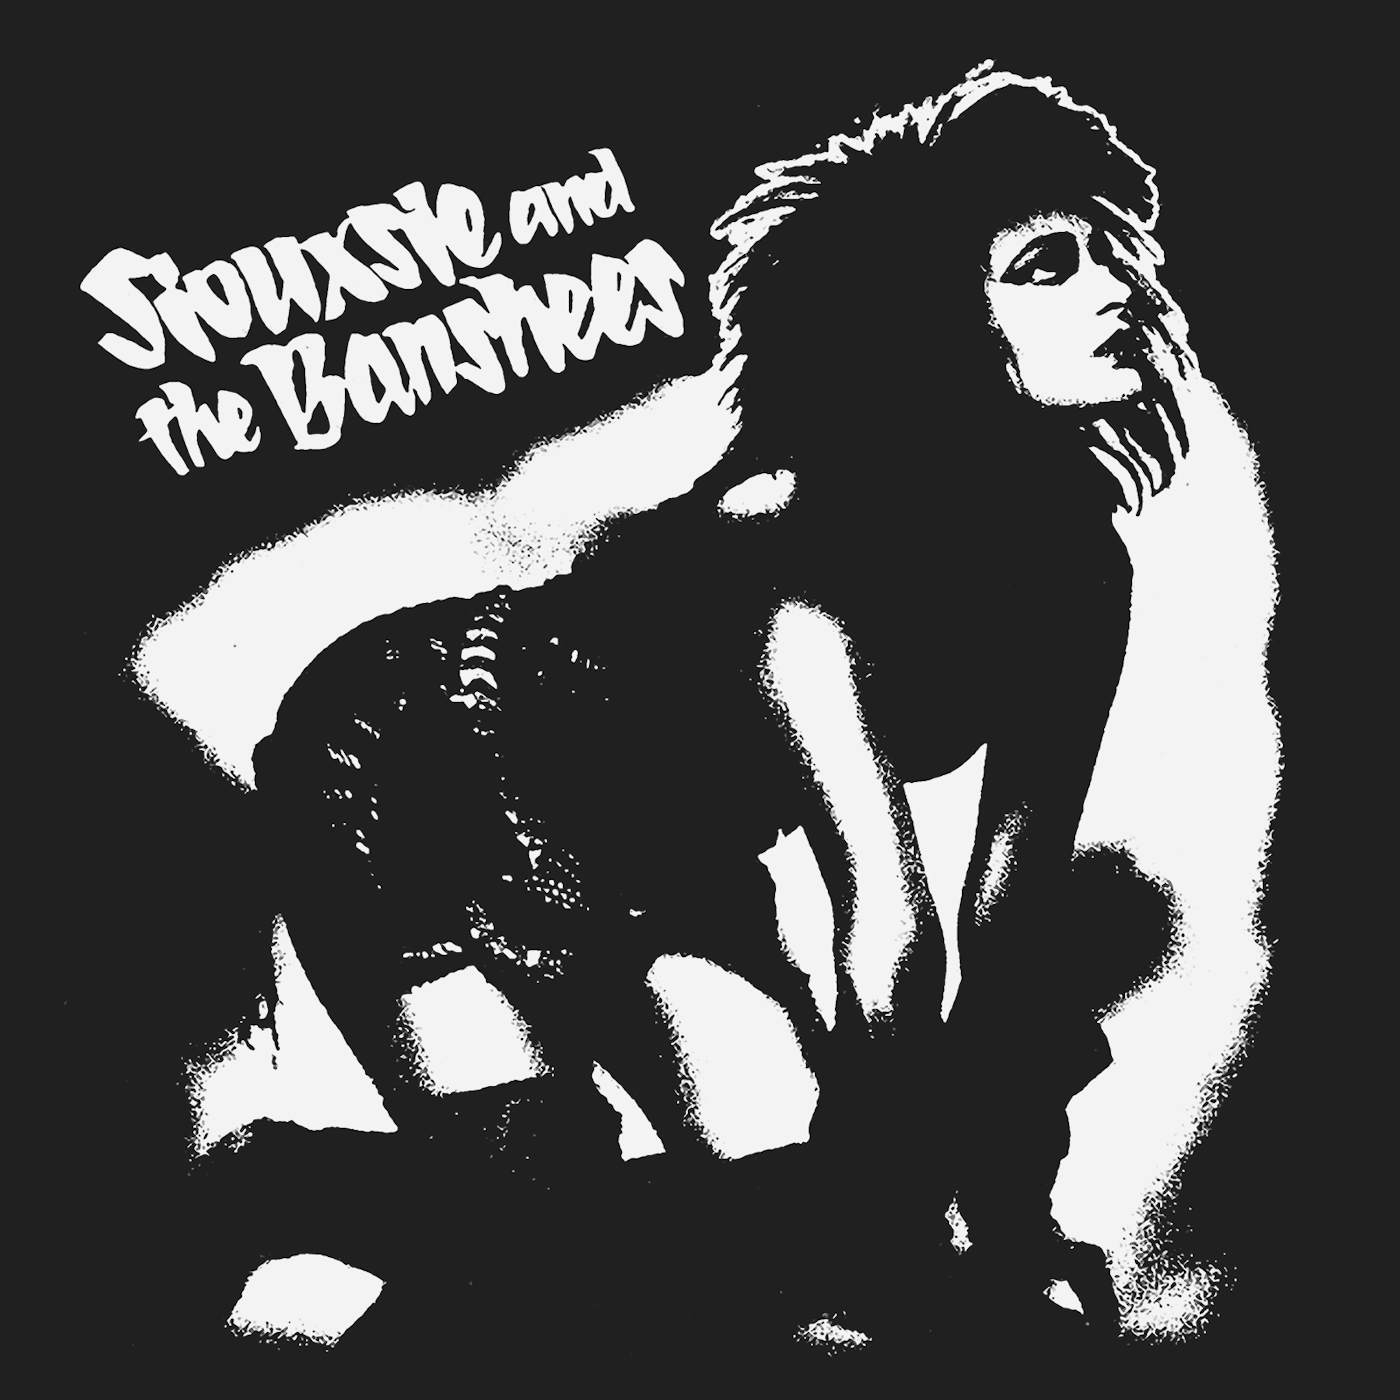 Siouxsie and the Banshees T-Shirt | Siouxsie Sioux Profile Siouxsie and the Banshees Shirt